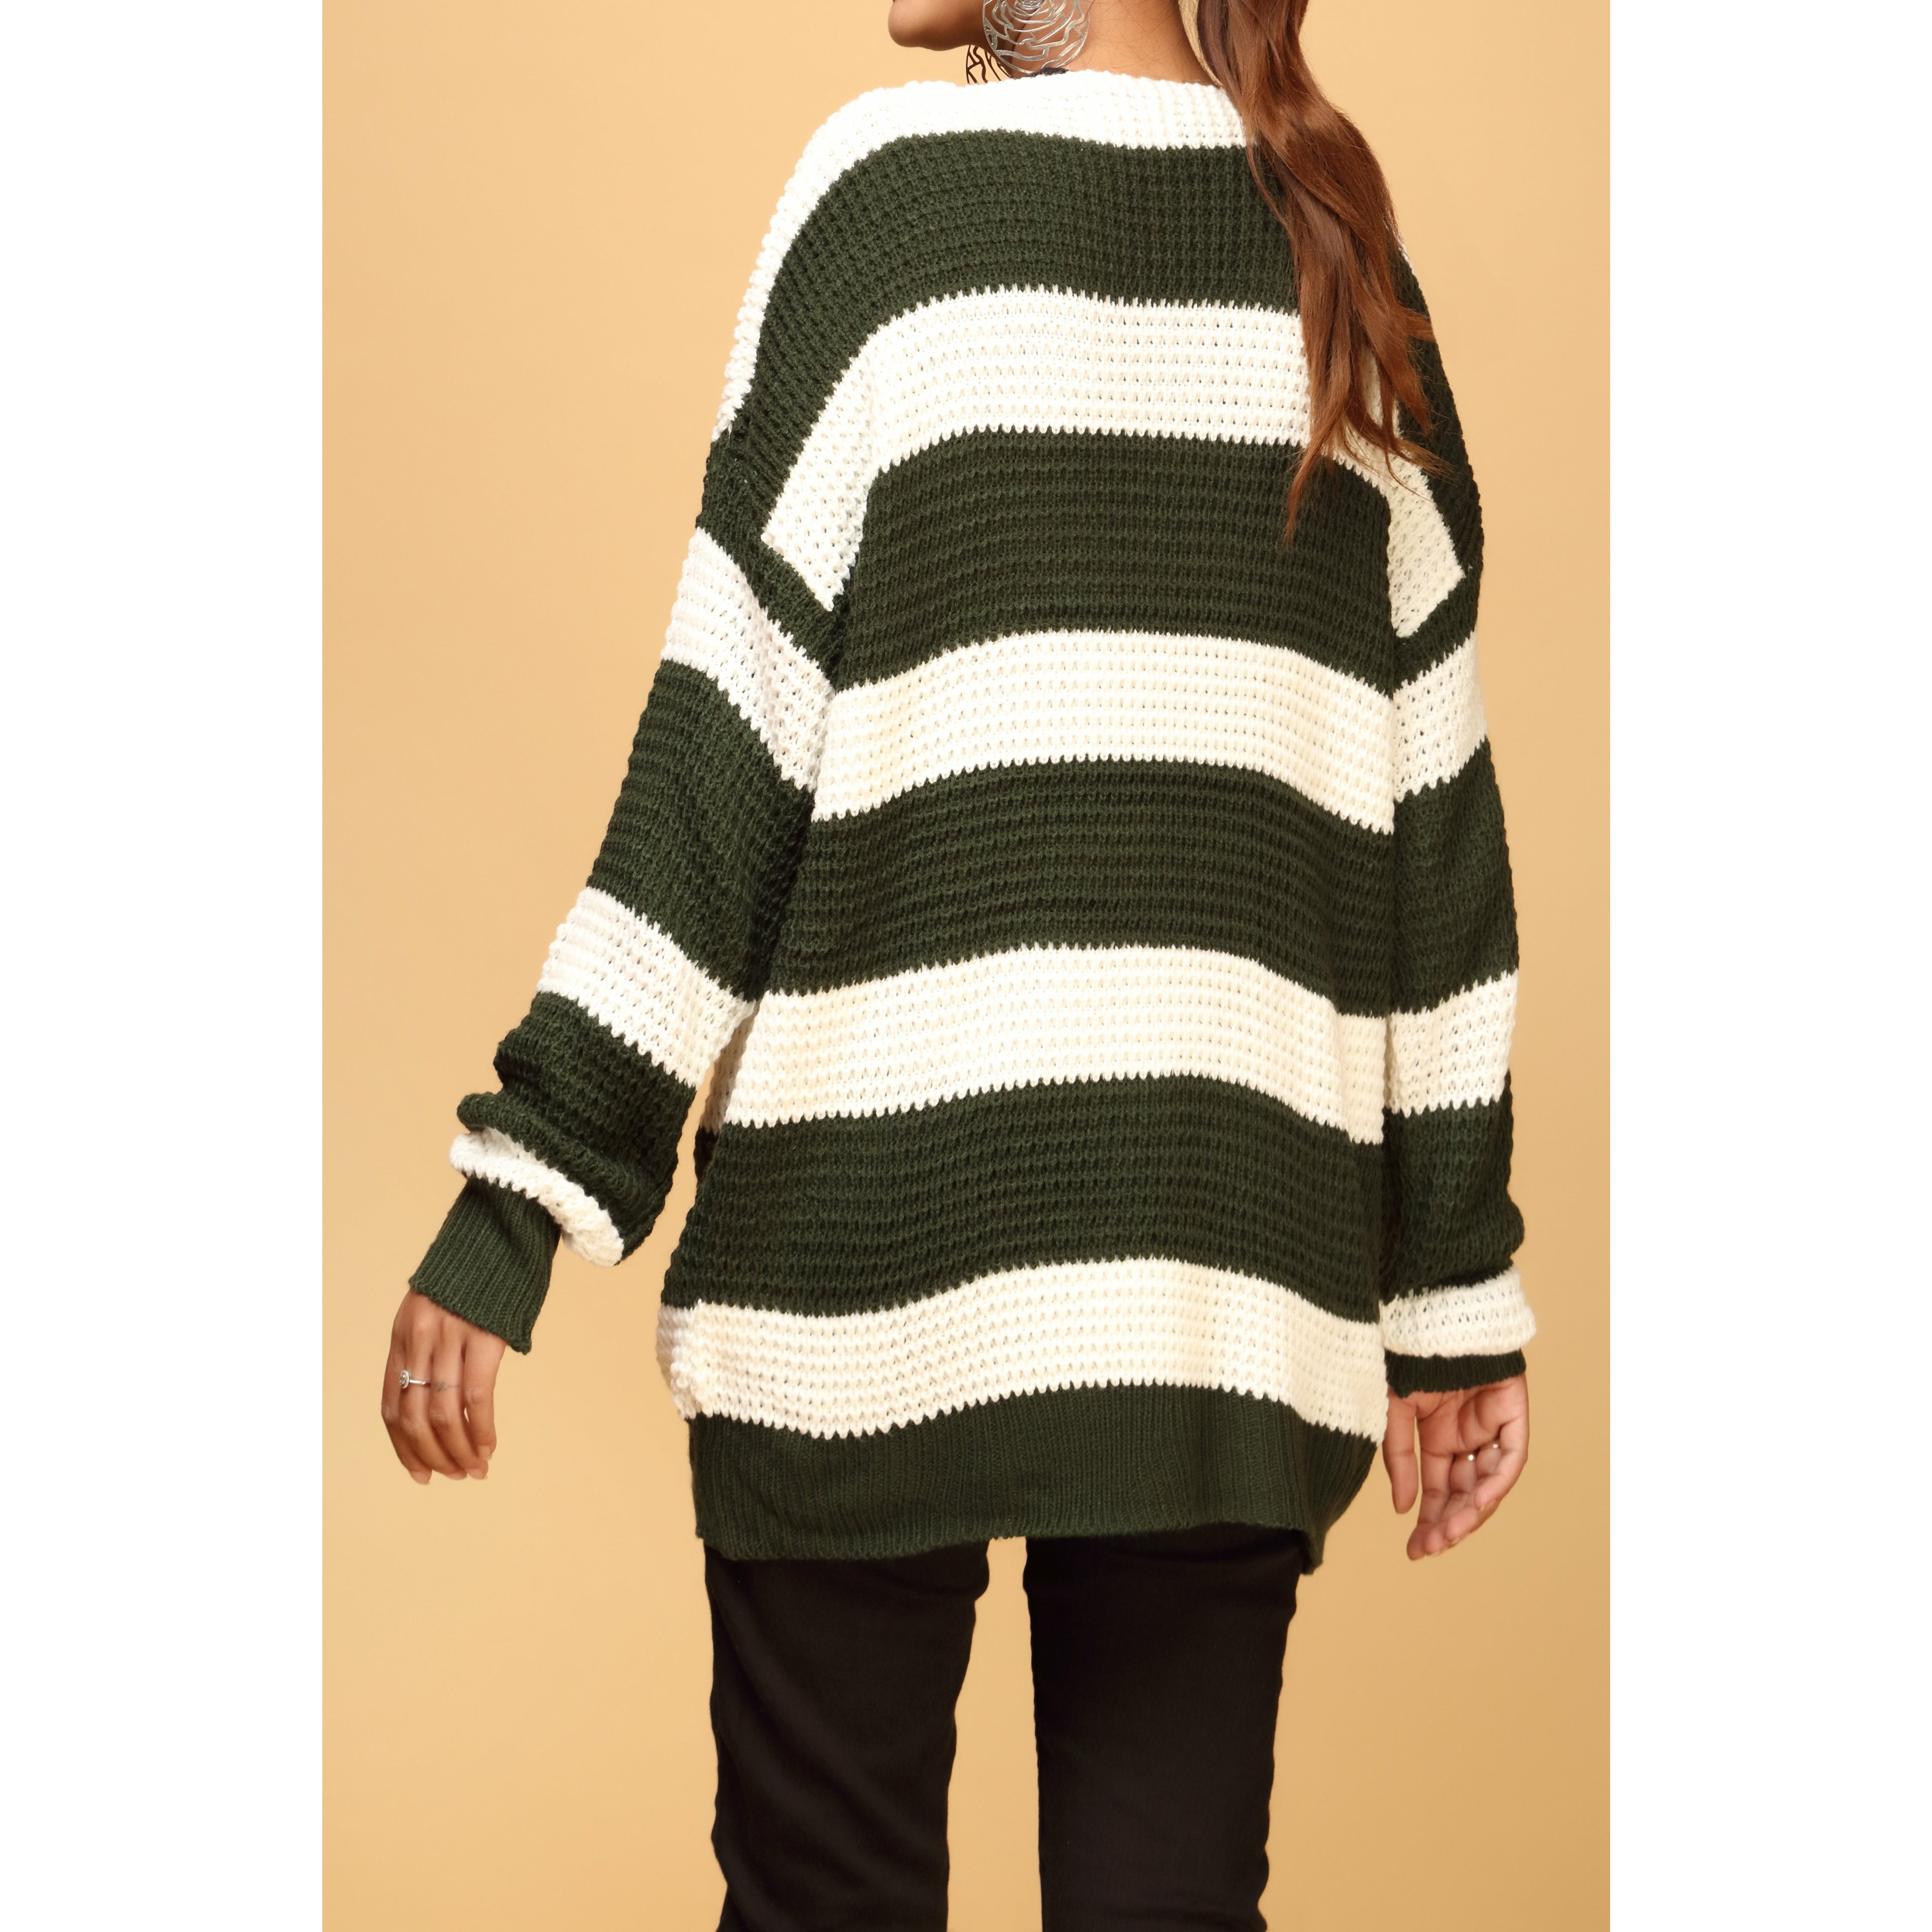 Green Color V-Neck Pullover Sweater PW1910